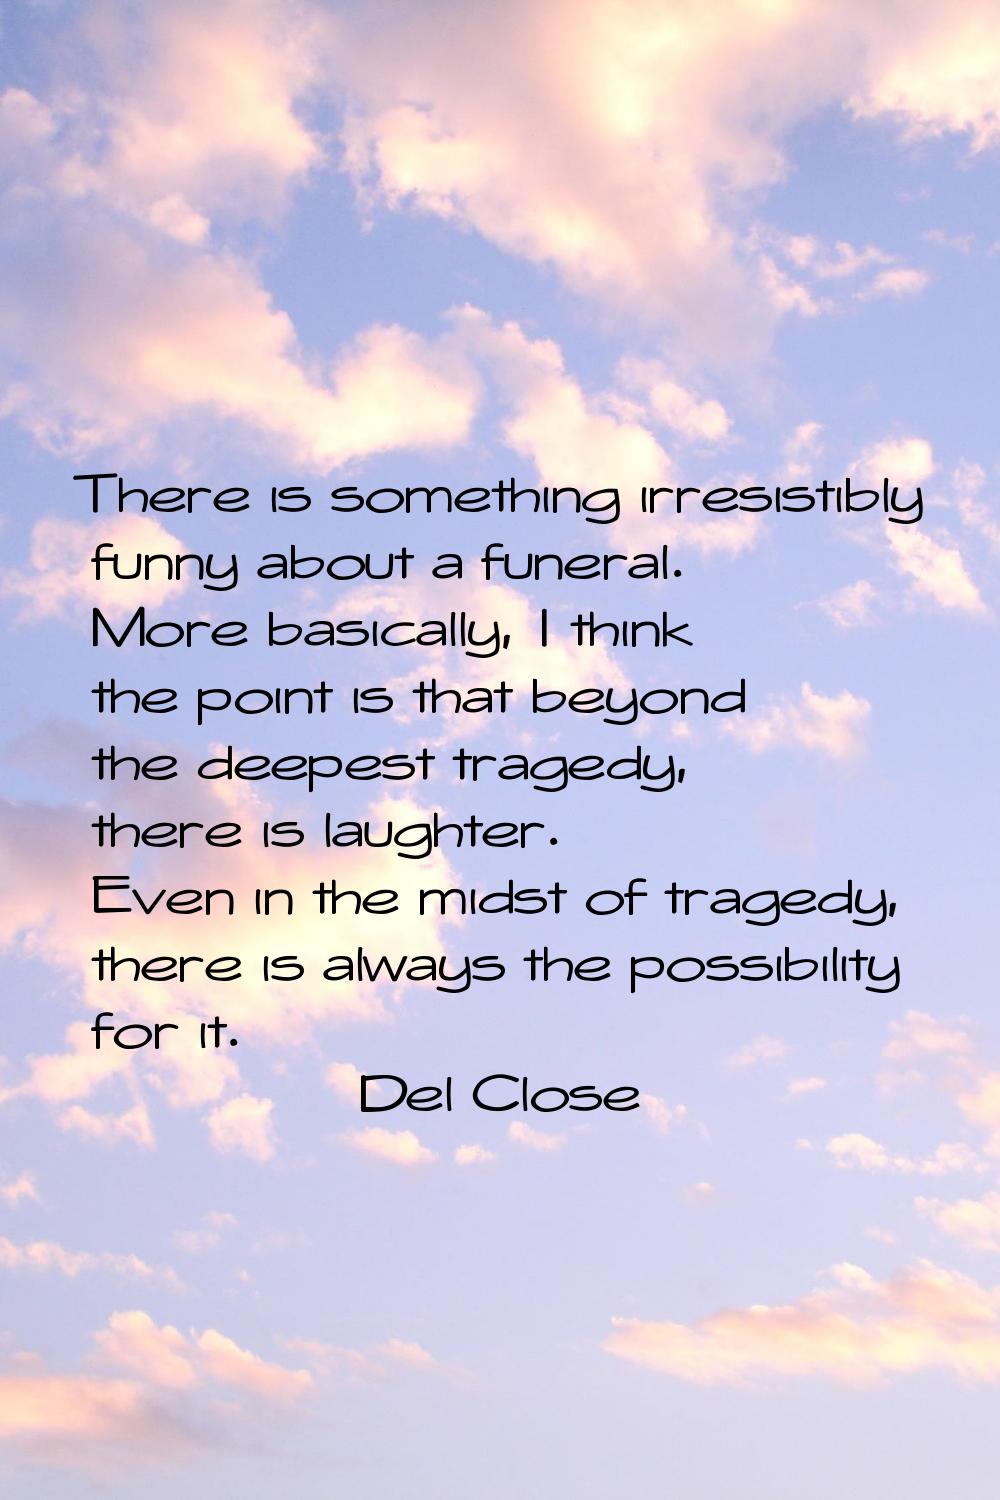 There is something irresistibly funny about a funeral. More basically, I think the point is that be